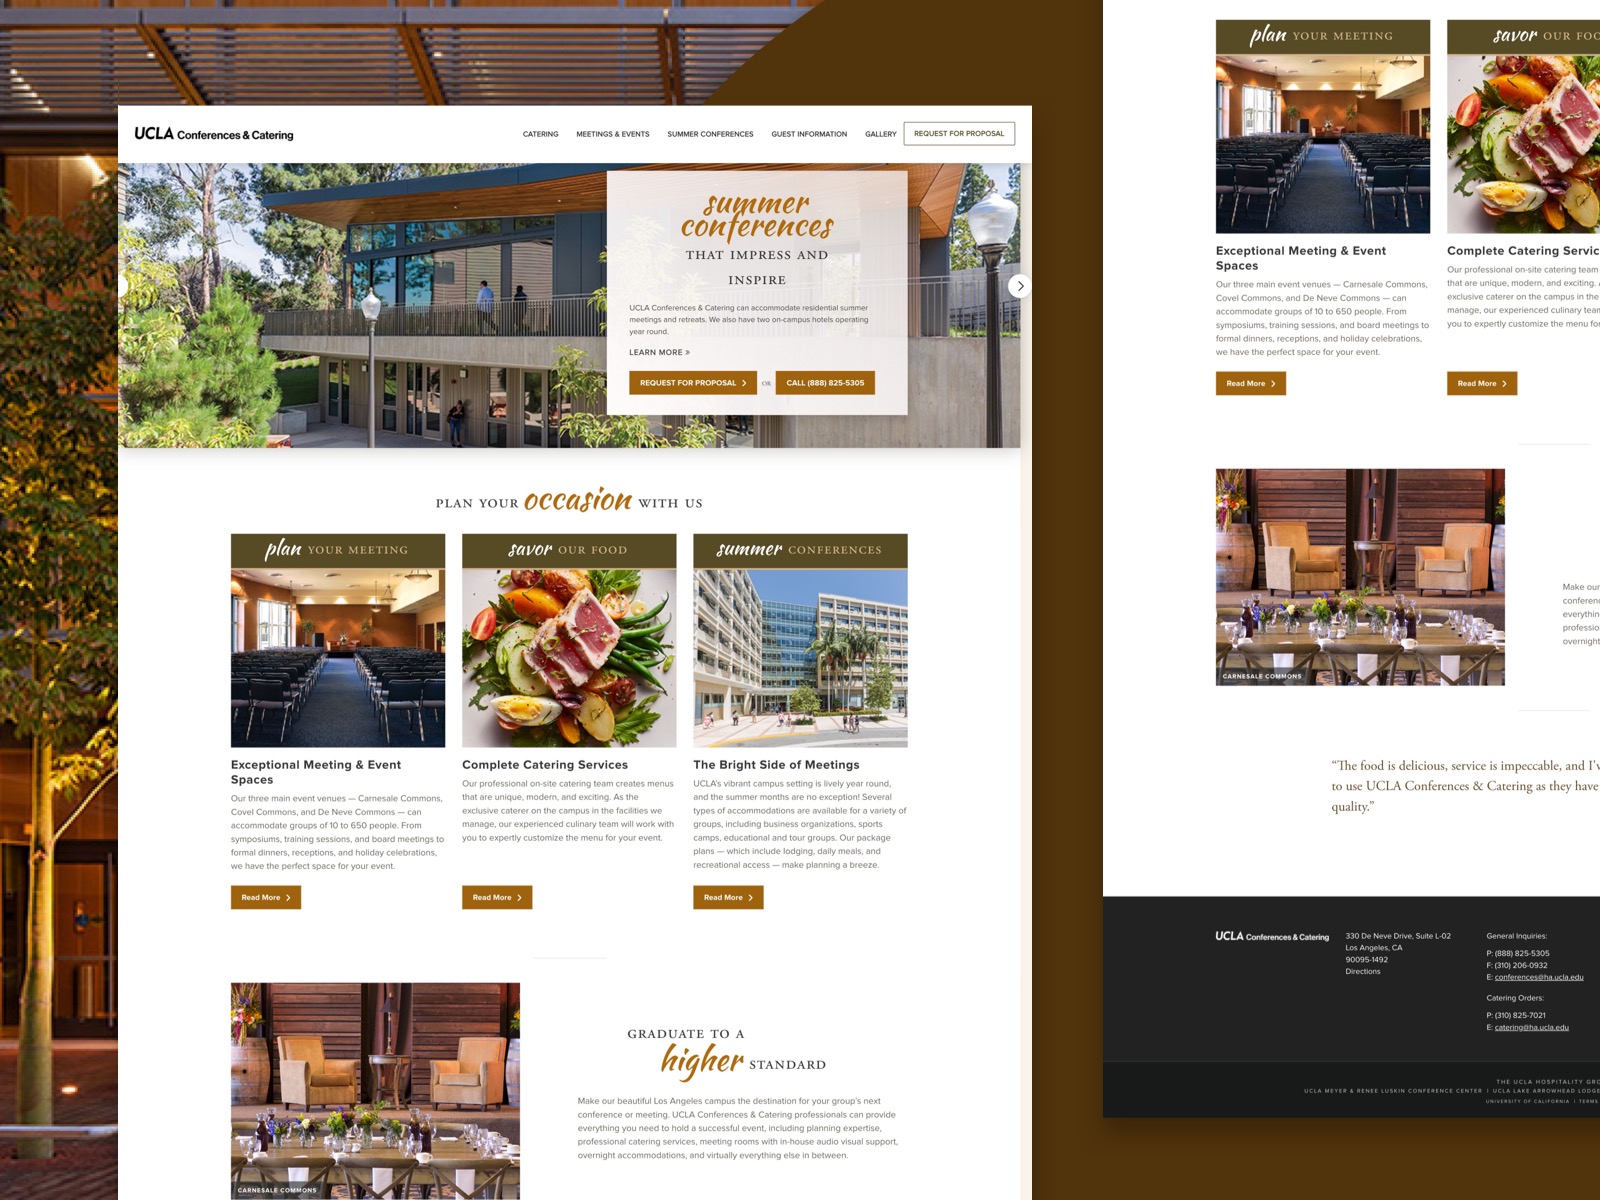 UCLA Conferences & Catering - Web Development Project